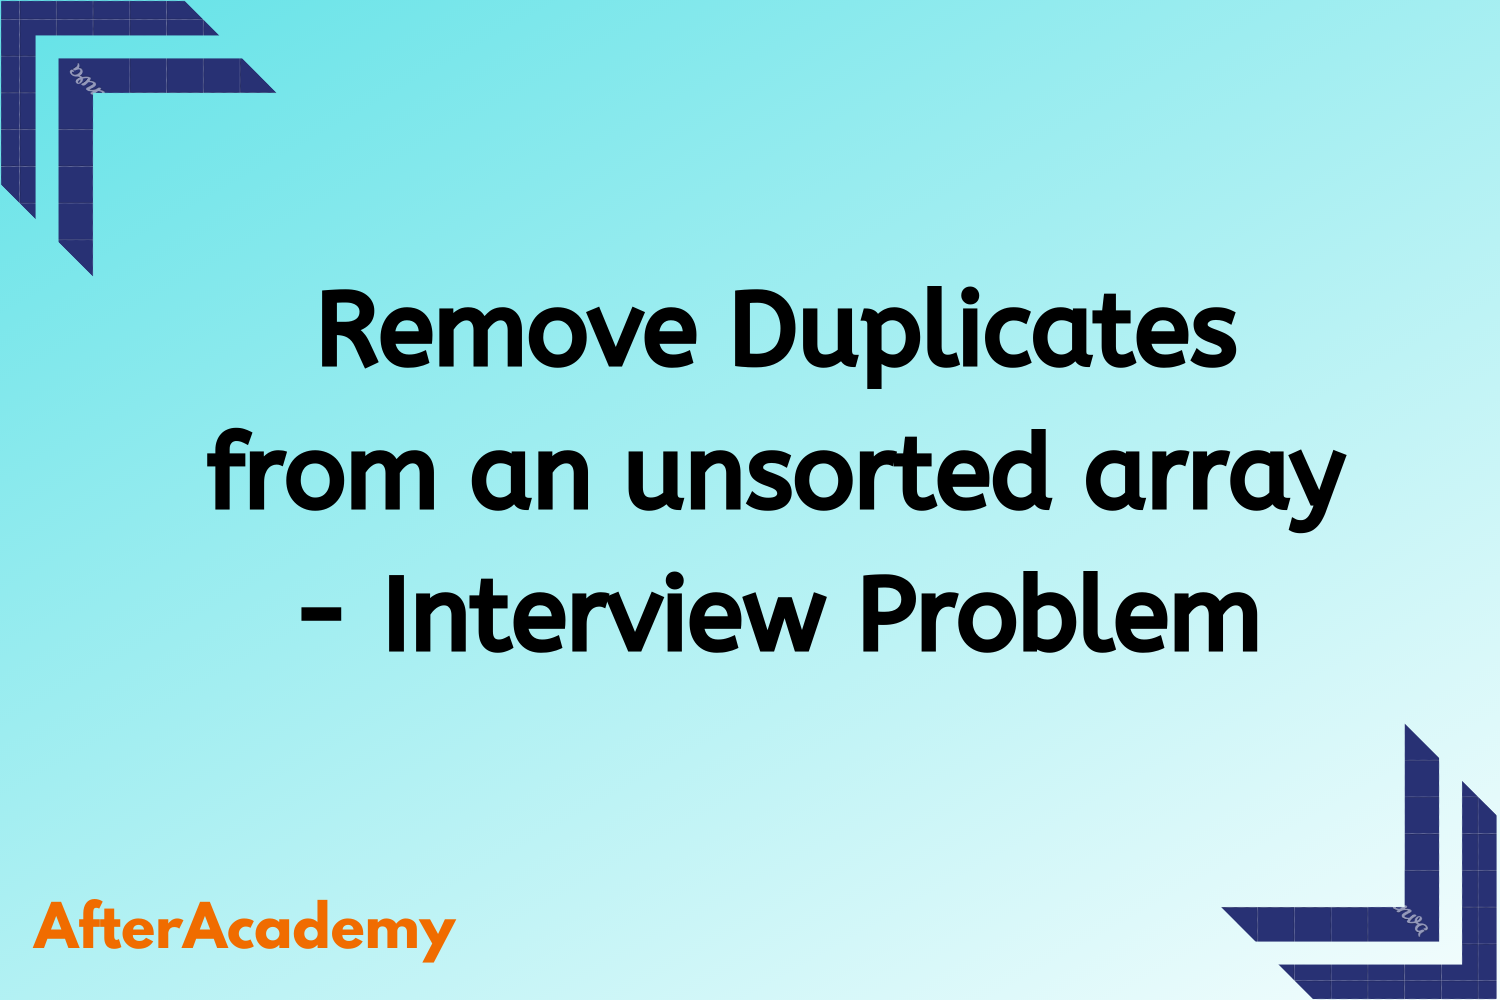 Remove Duplicates from an unsorted arrray